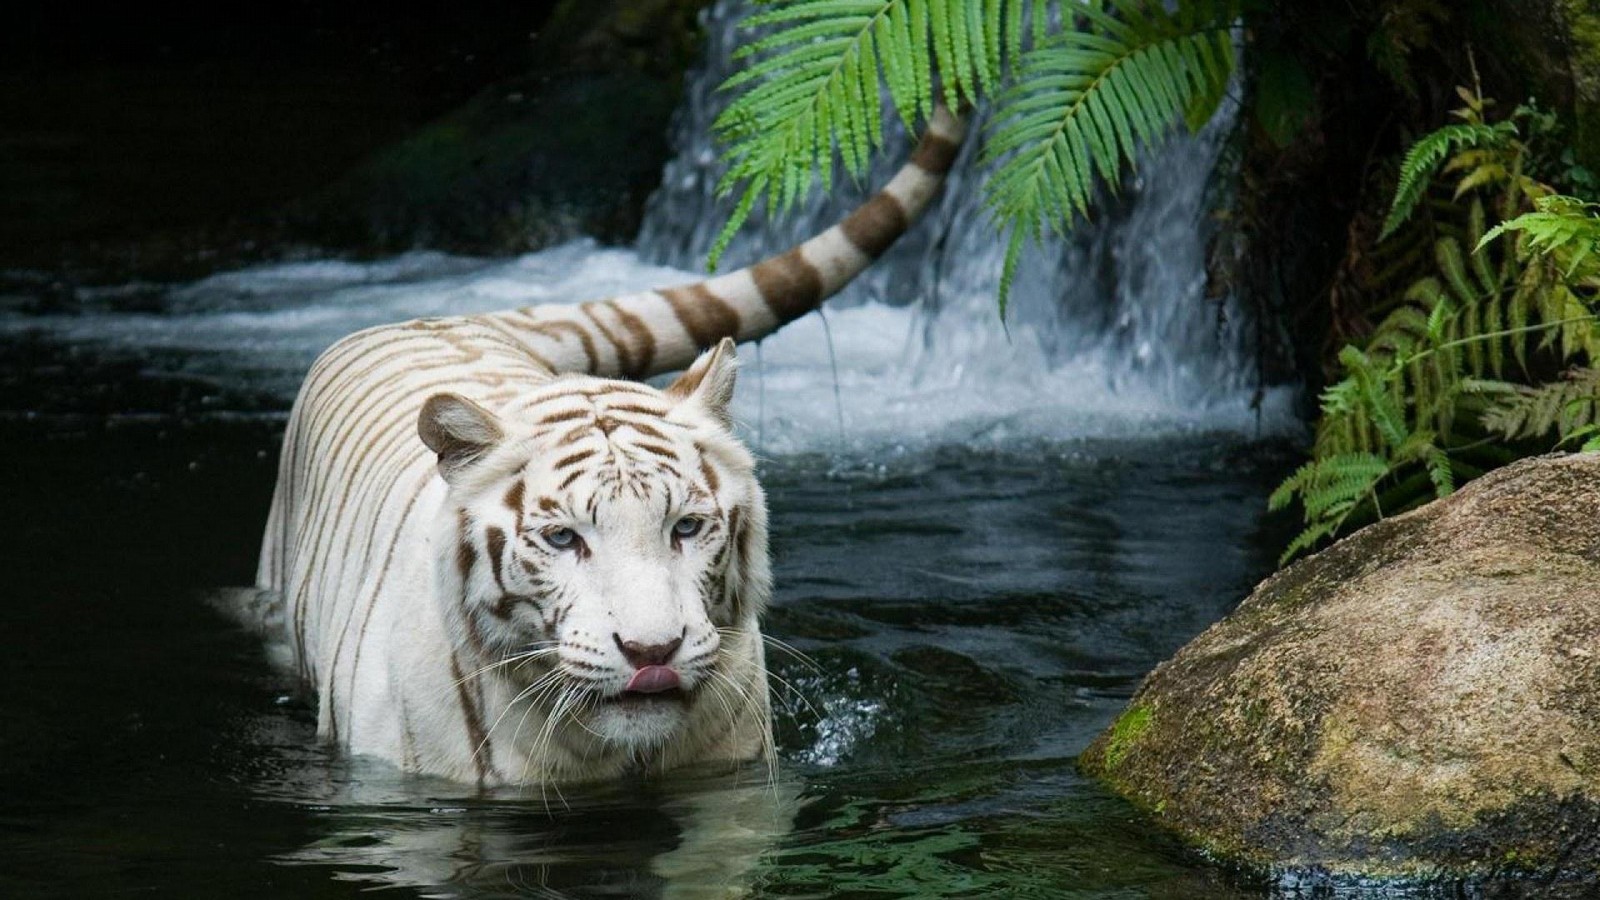 Tiger In Water HD Wallpaper High Quality